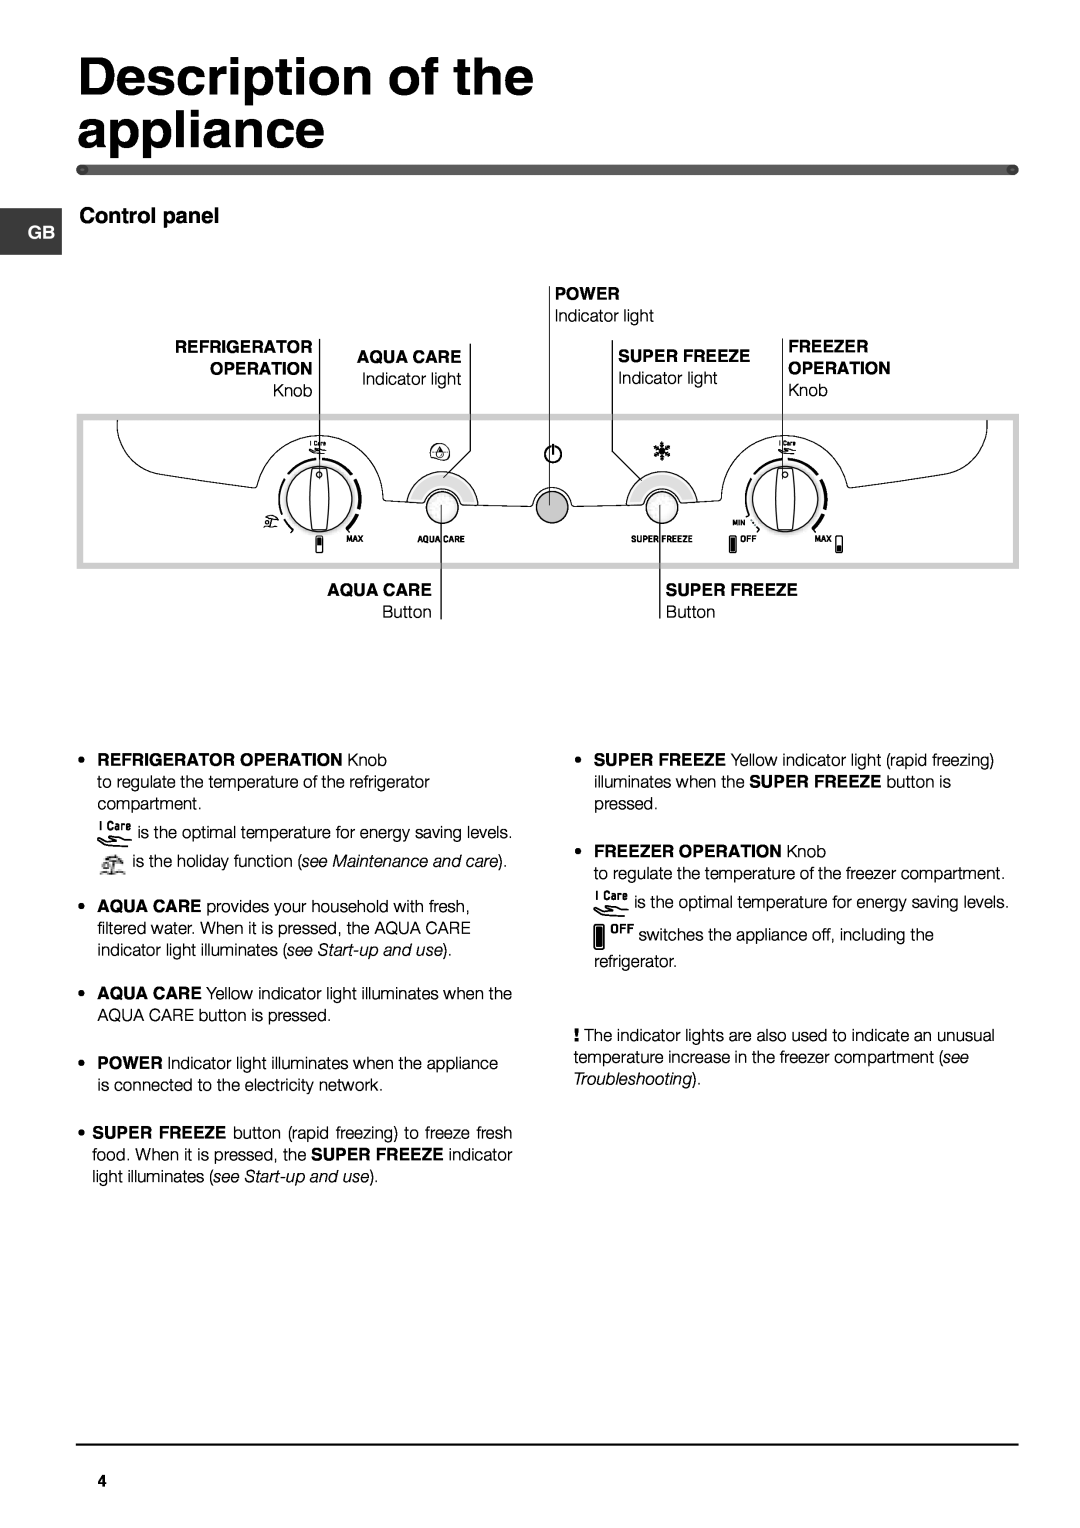 Hotpoint FFQ50P manual Description of the appliance, Control panel 